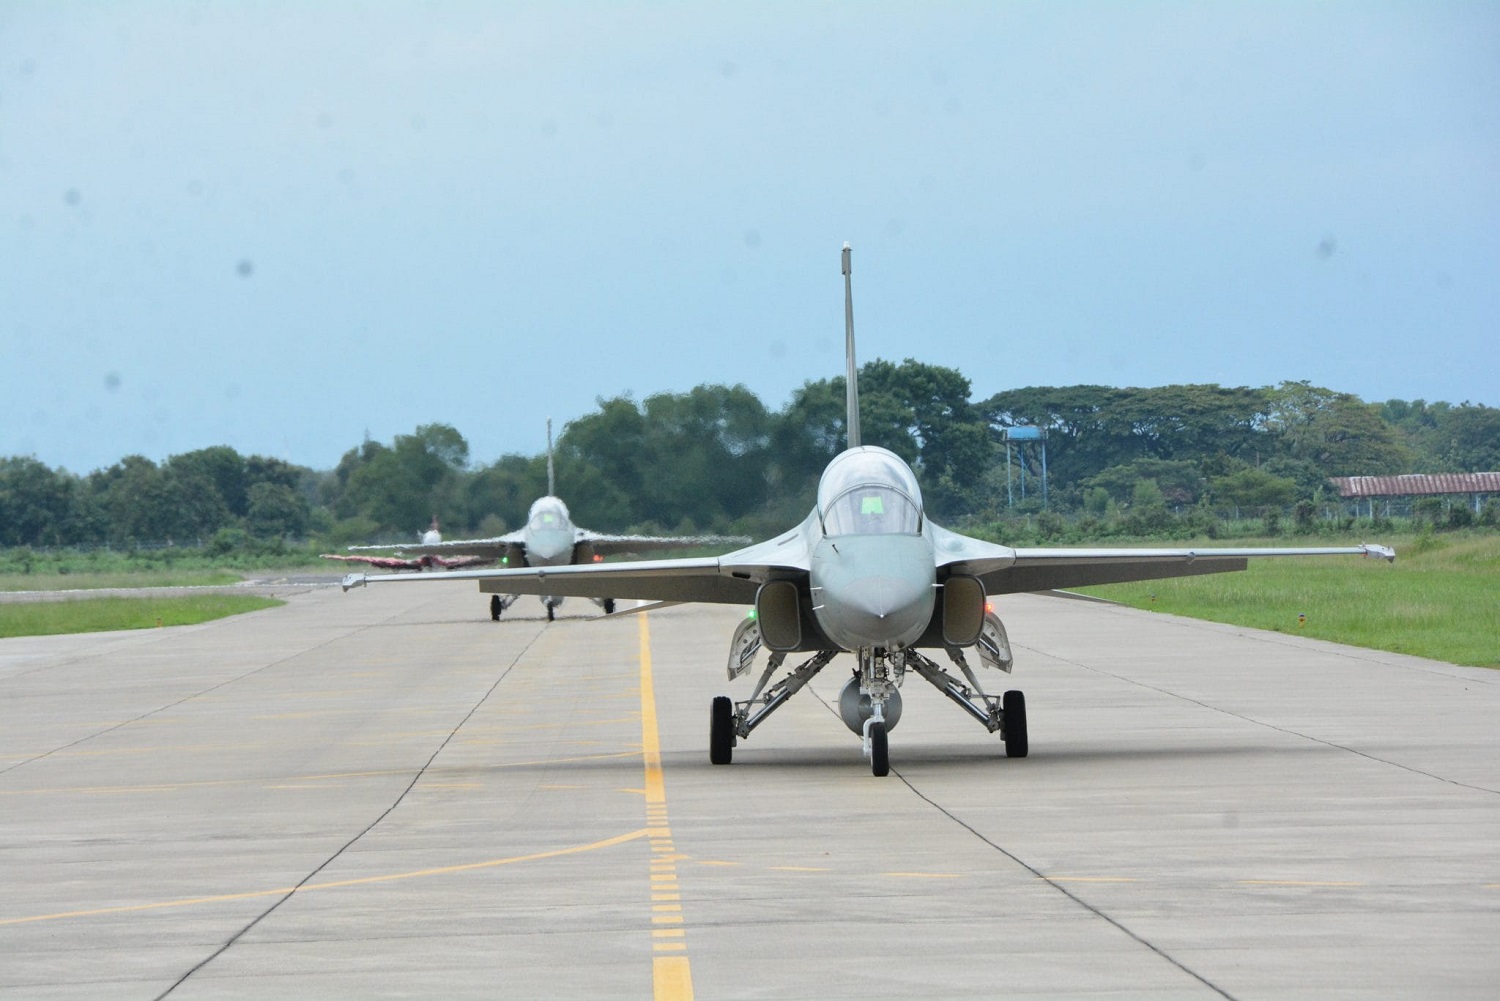 Indonesian Air Force KAI T-50i advanced jet trainers